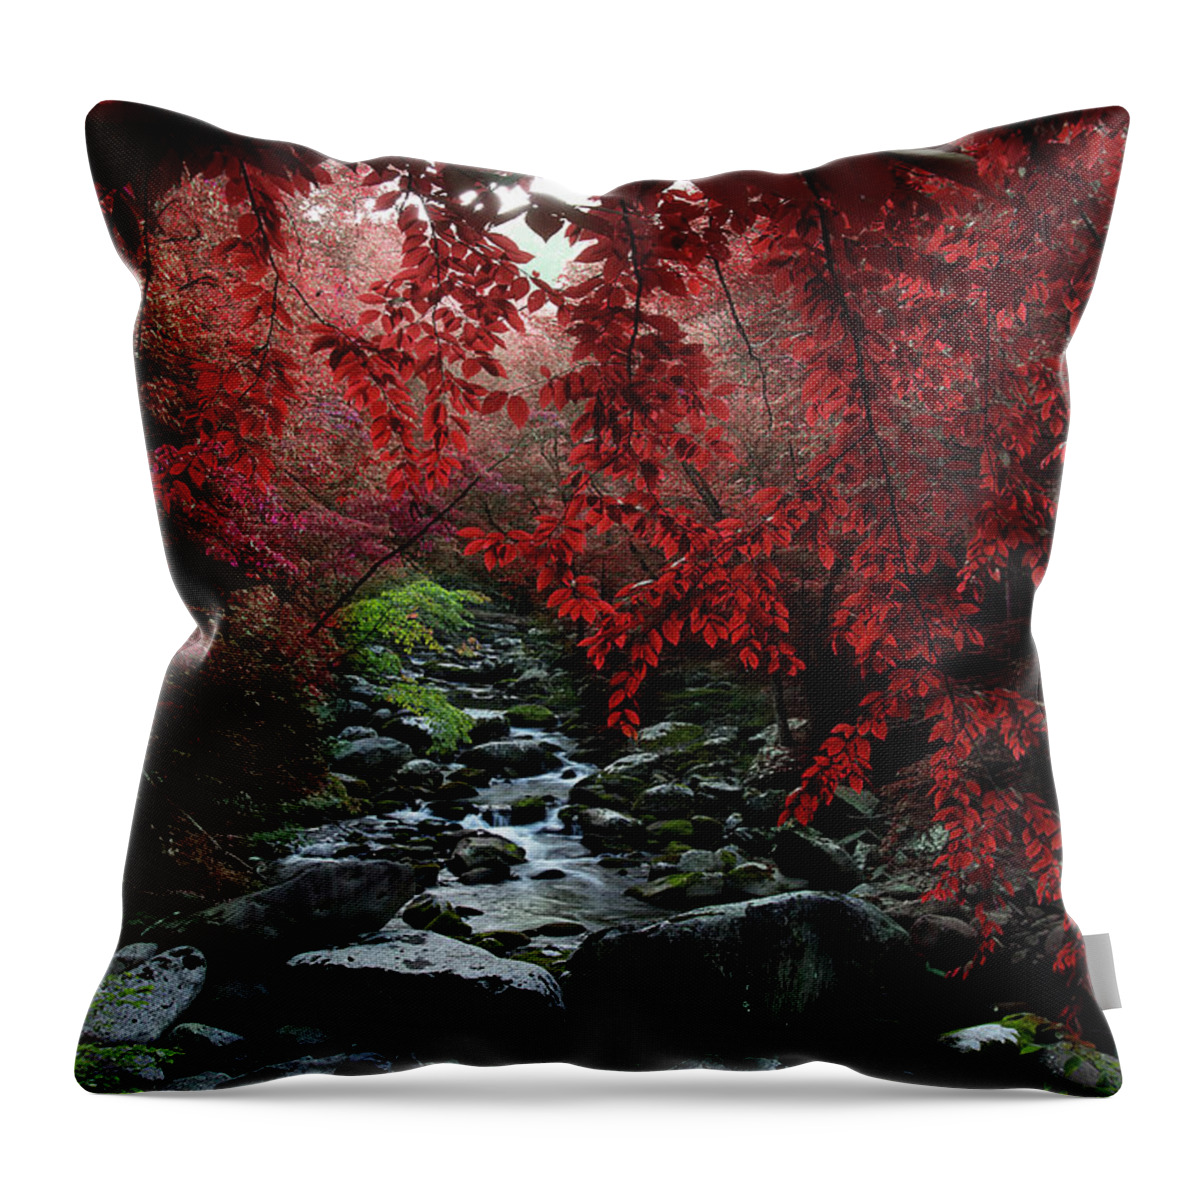 Smoky Mountain Stream Throw Pillow featuring the photograph Let's Dream Together by Mike Eingle